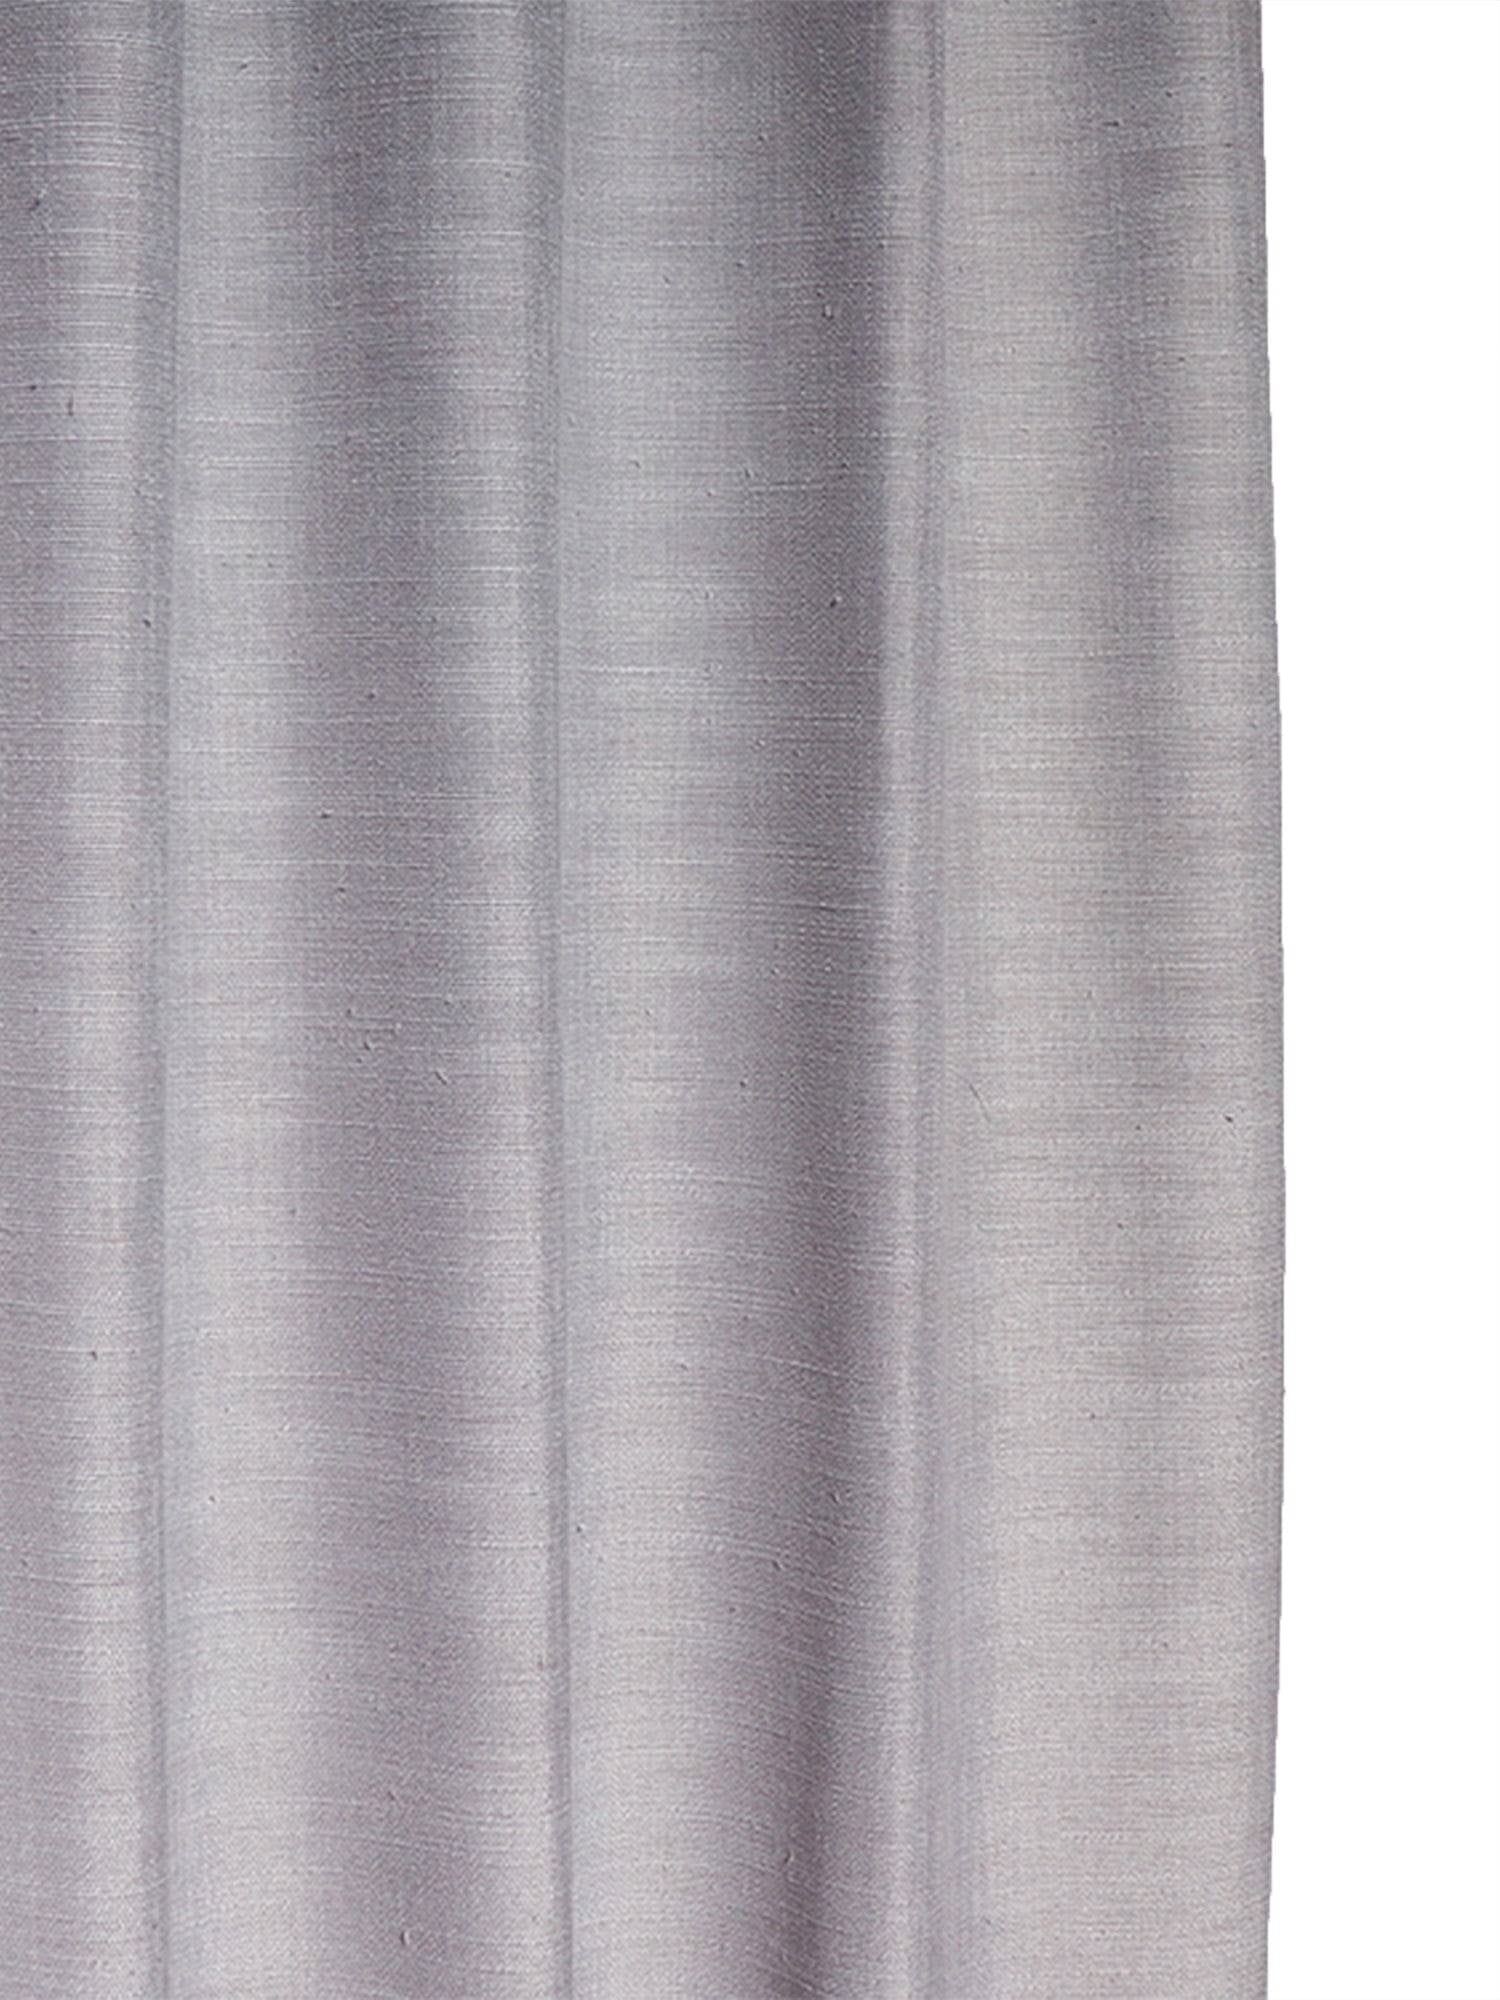 Cotton Blend Grey Curtains 7' (Cotton Blend)closeup of door curtain with eyelet in grey color - 7 feet, 54x84 inch